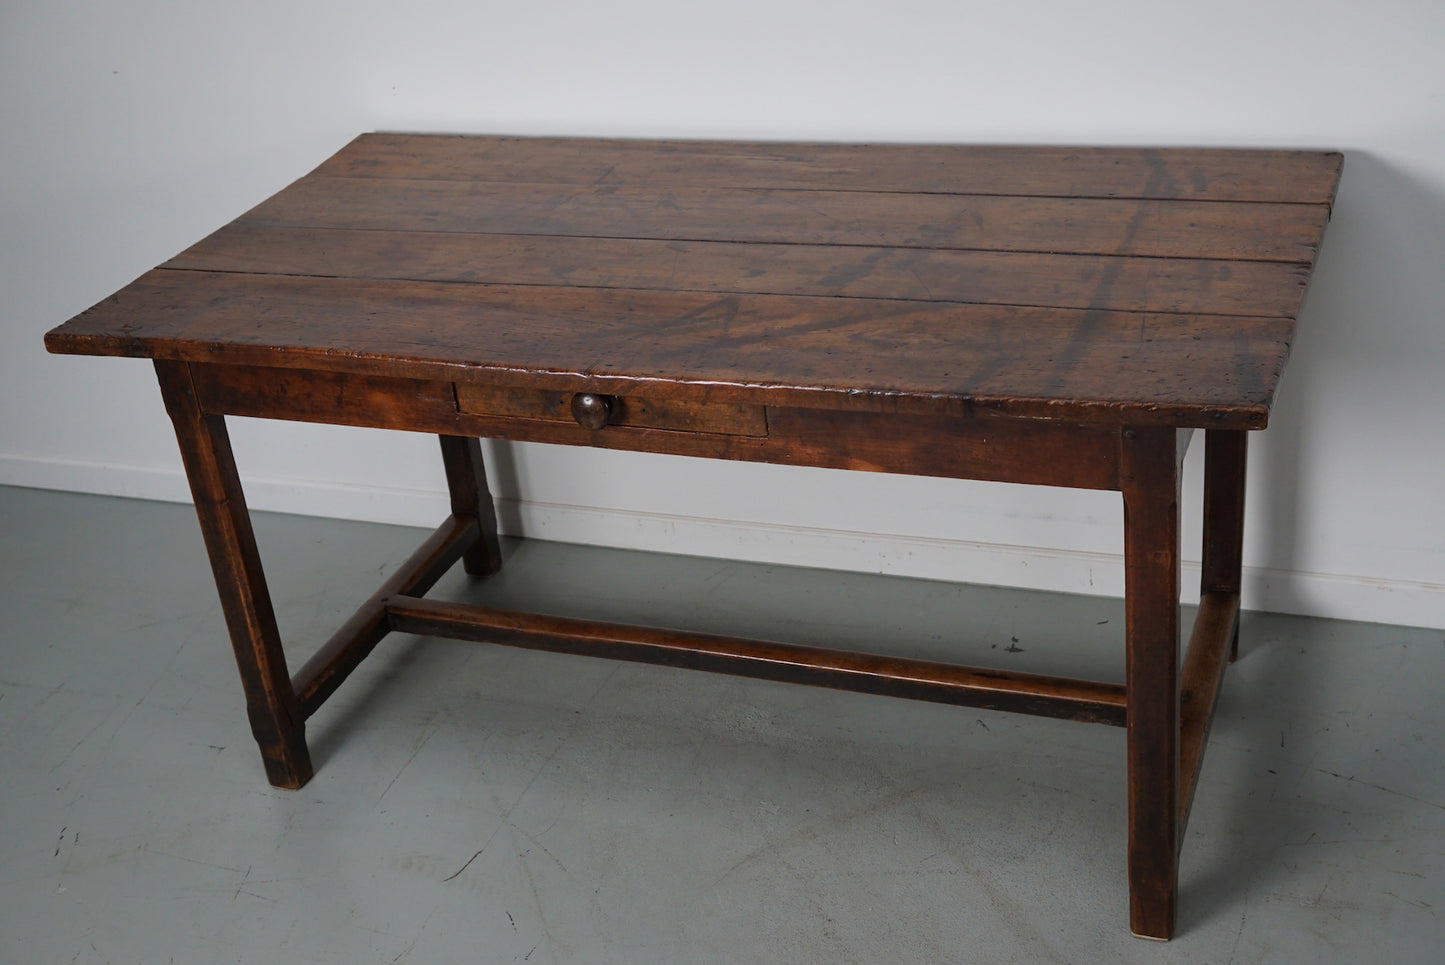 Antique Fruitwood 19th Century French Rustic Farmhouse Dining Table or Desk